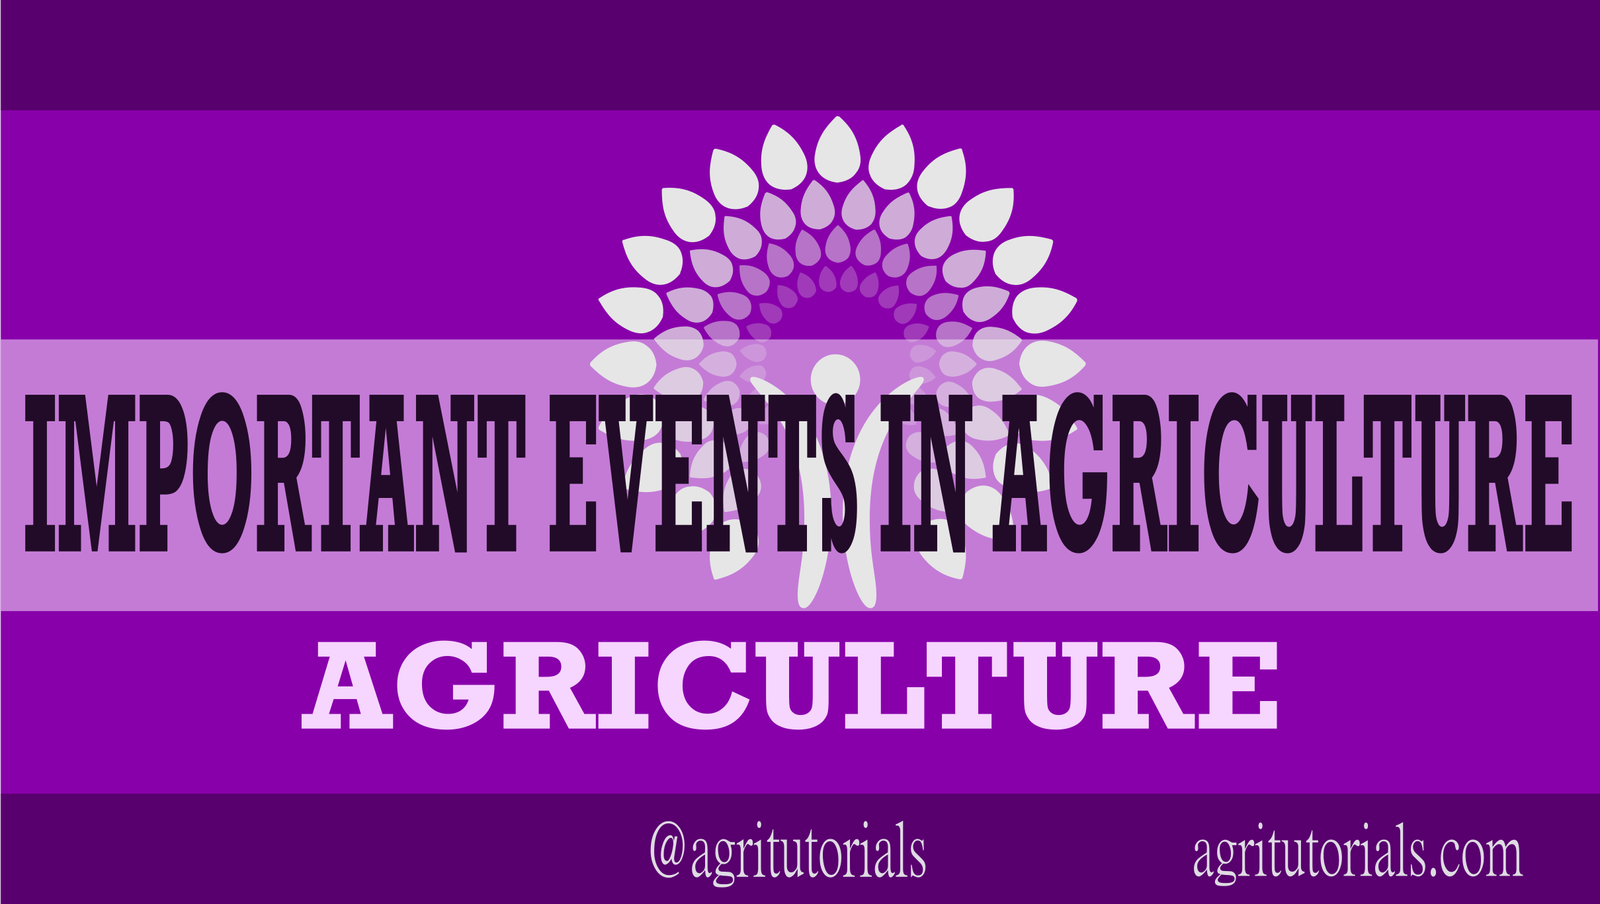 IMPORTANT EVENTS IN AGRICULTURE